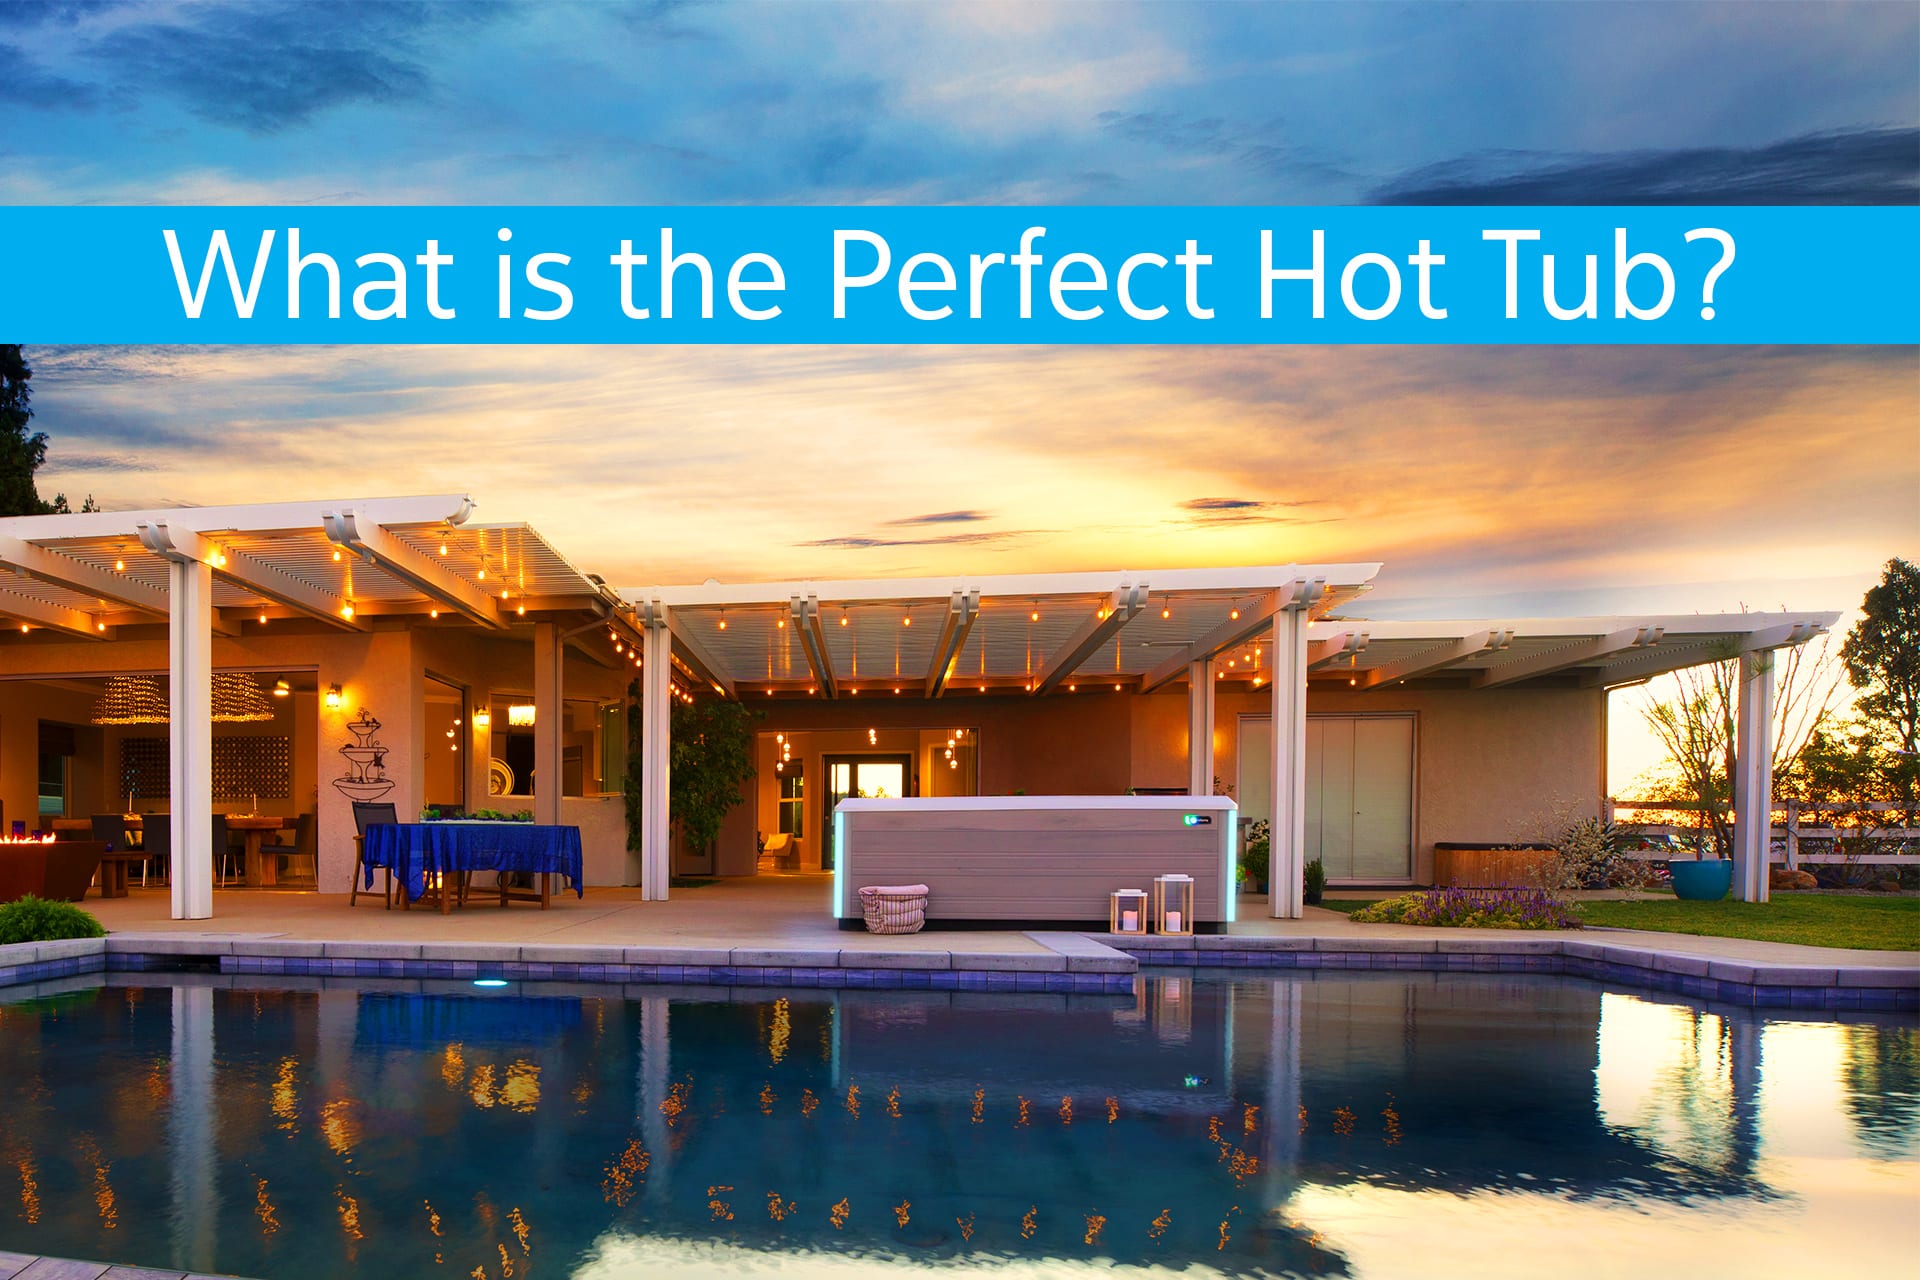 What is the Perfect Hot Tub?